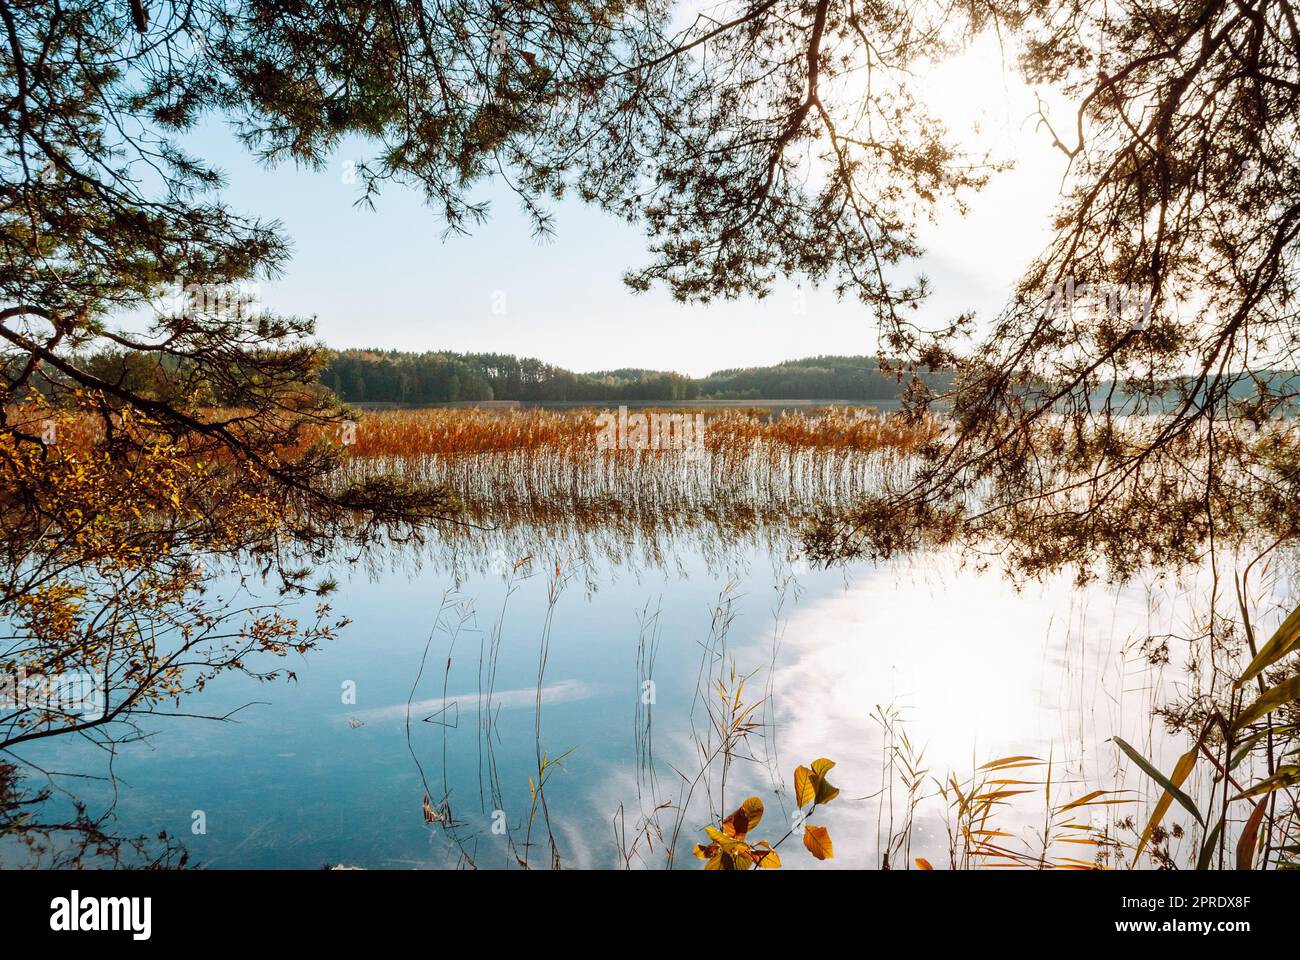 Landscape of Lake Baltieji Lakajai in Labanoras Regional Park, Lithuania. Pine branches frame the turquoise water of the lake and the reeds growing in Stock Photo